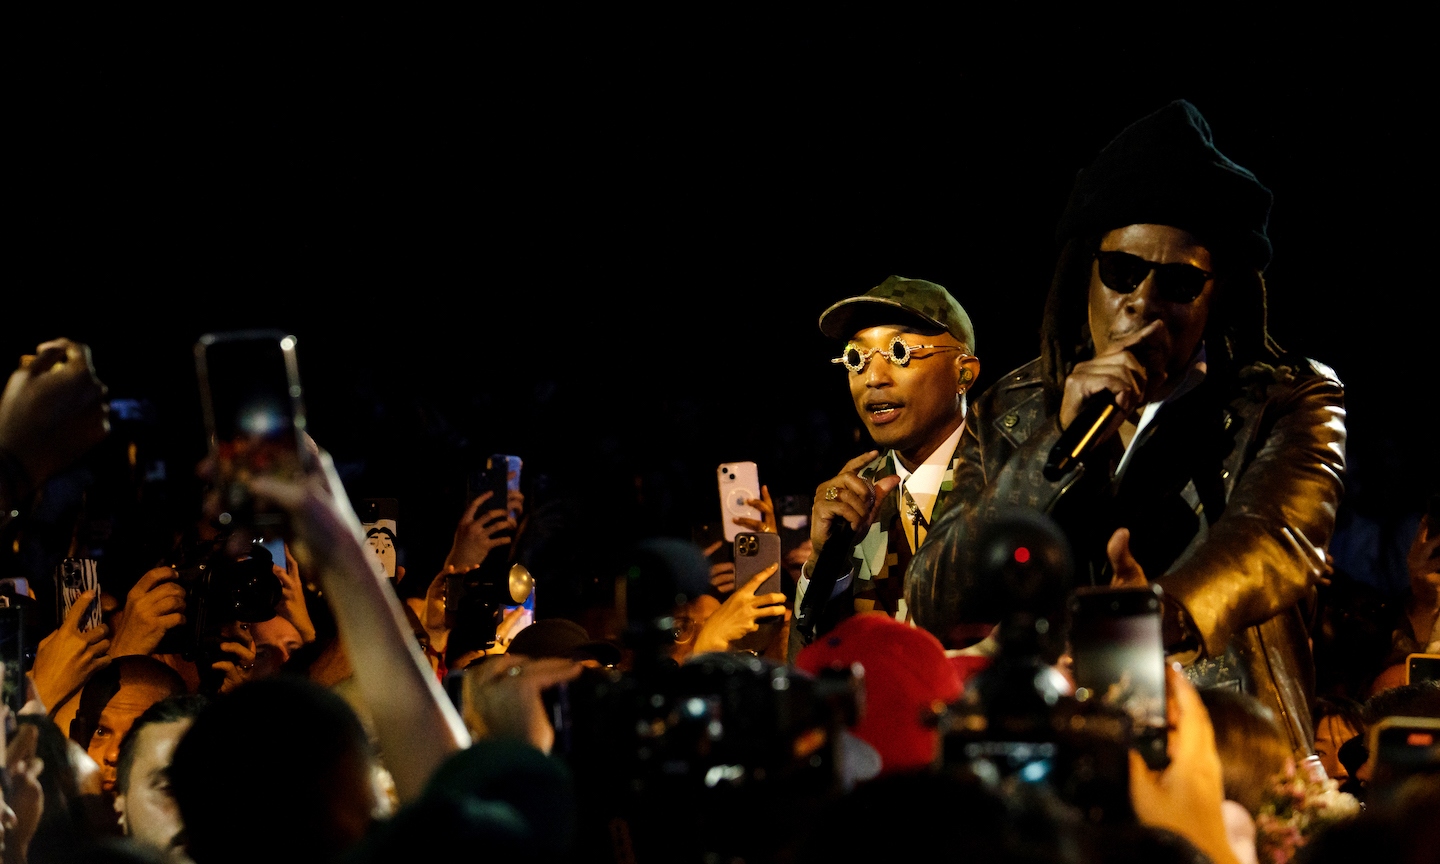 Pharrell Williams' highly anticipated debut show for Louis Vuitton